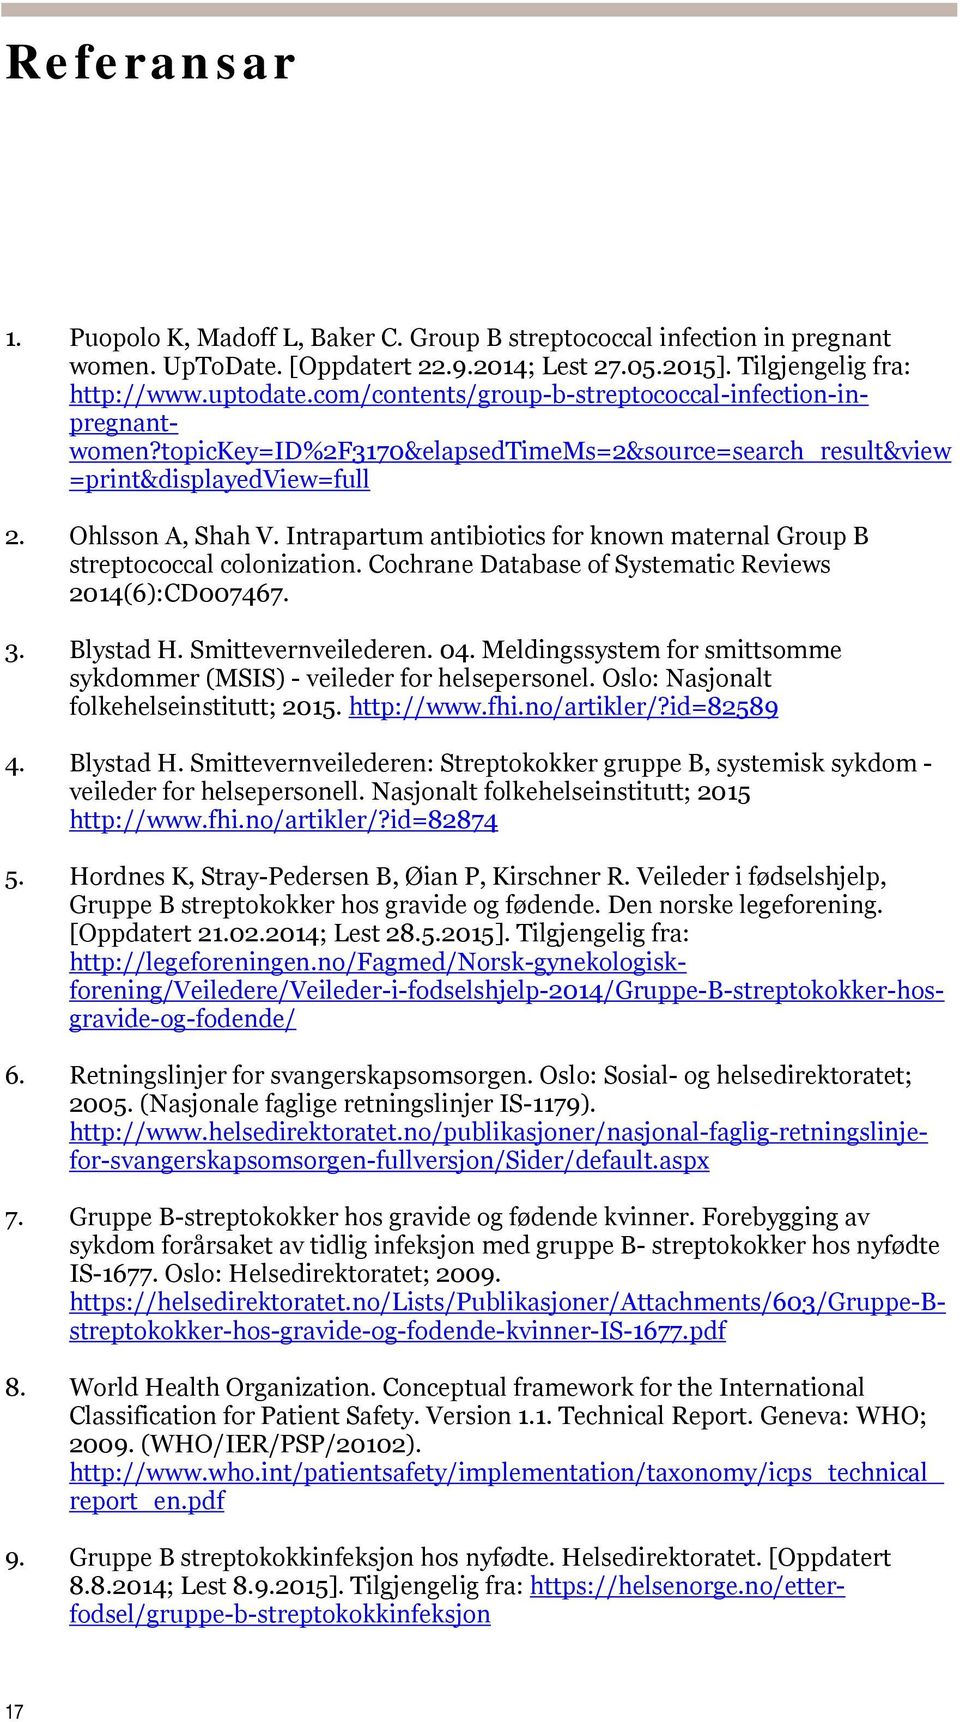 Intrapartum antibiotics for known maternal Group B streptococcal colonization. Cochrane Database of Systematic Reviews 2014(6):CD007467. 3. Blystad H. Smittevernveilederen. 04.